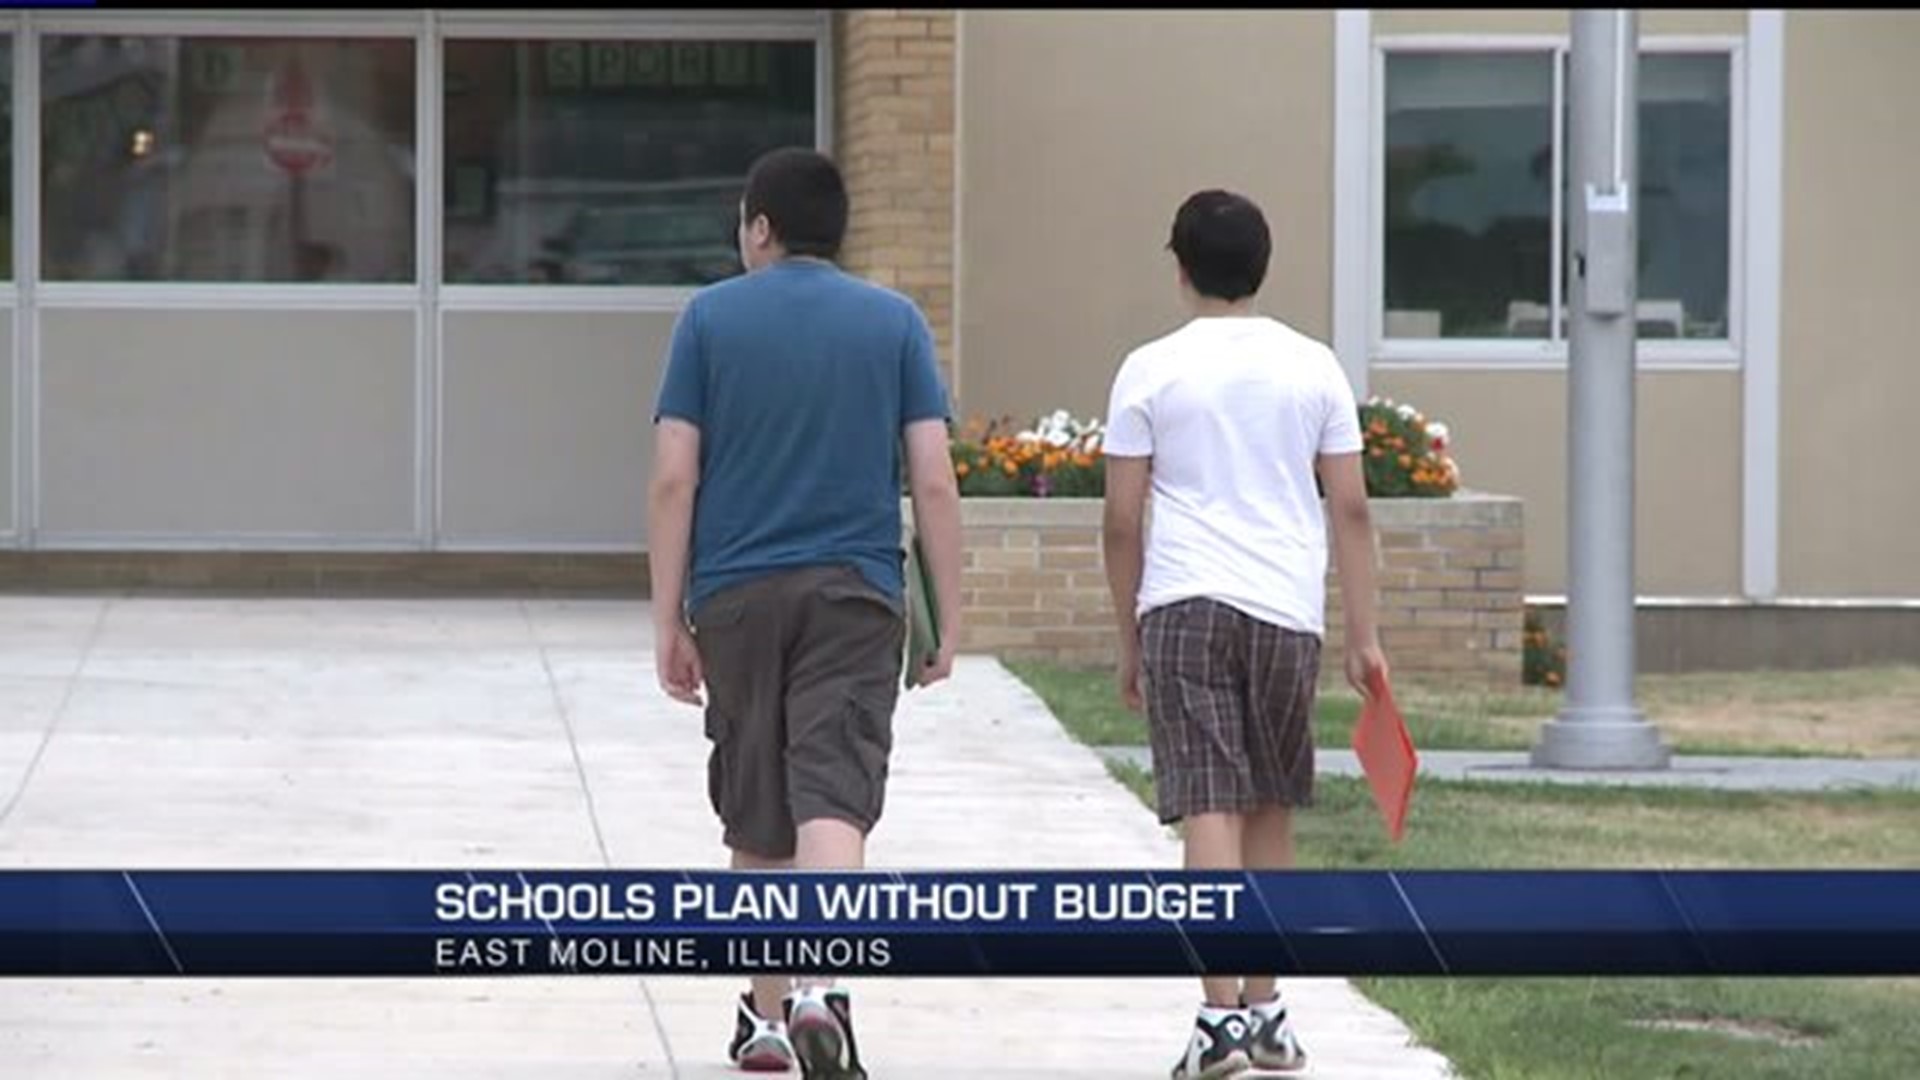 East Moline School District plans to use reserves if Illinois has no budget by July 1